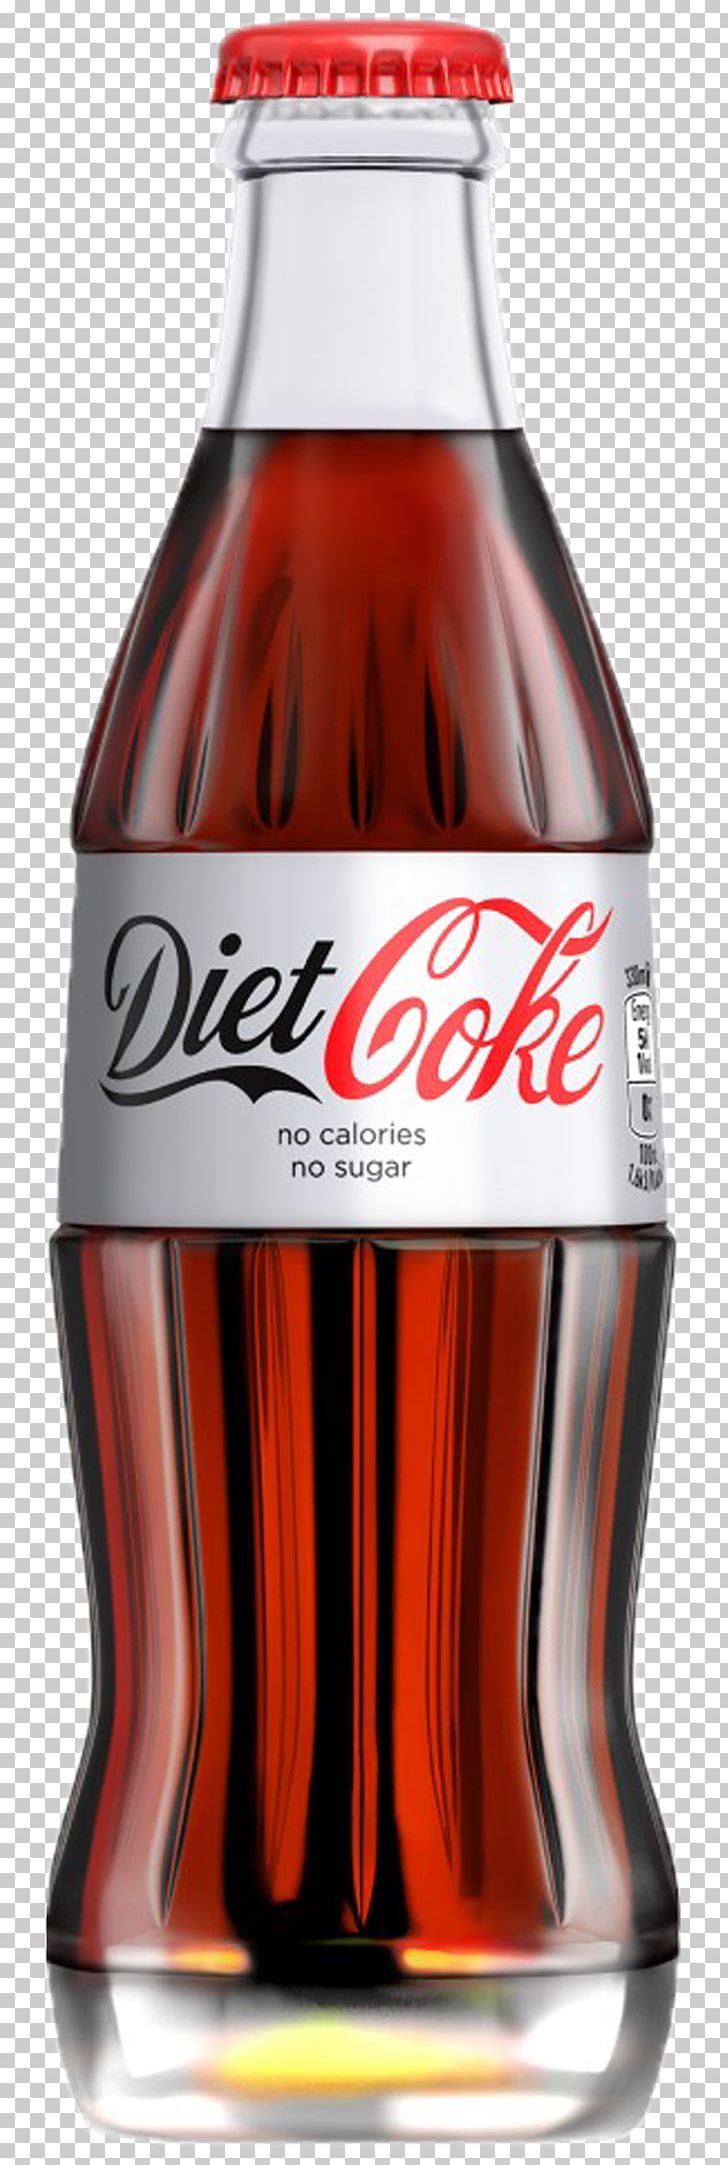 Diet Coke Fizzy Drinks Coca-Cola Drink Mixer Cream Soda PNG, Clipart, Beverage Can, Bottle, Carbonated Soft Drinks, Coca, Cocacola Free PNG Download